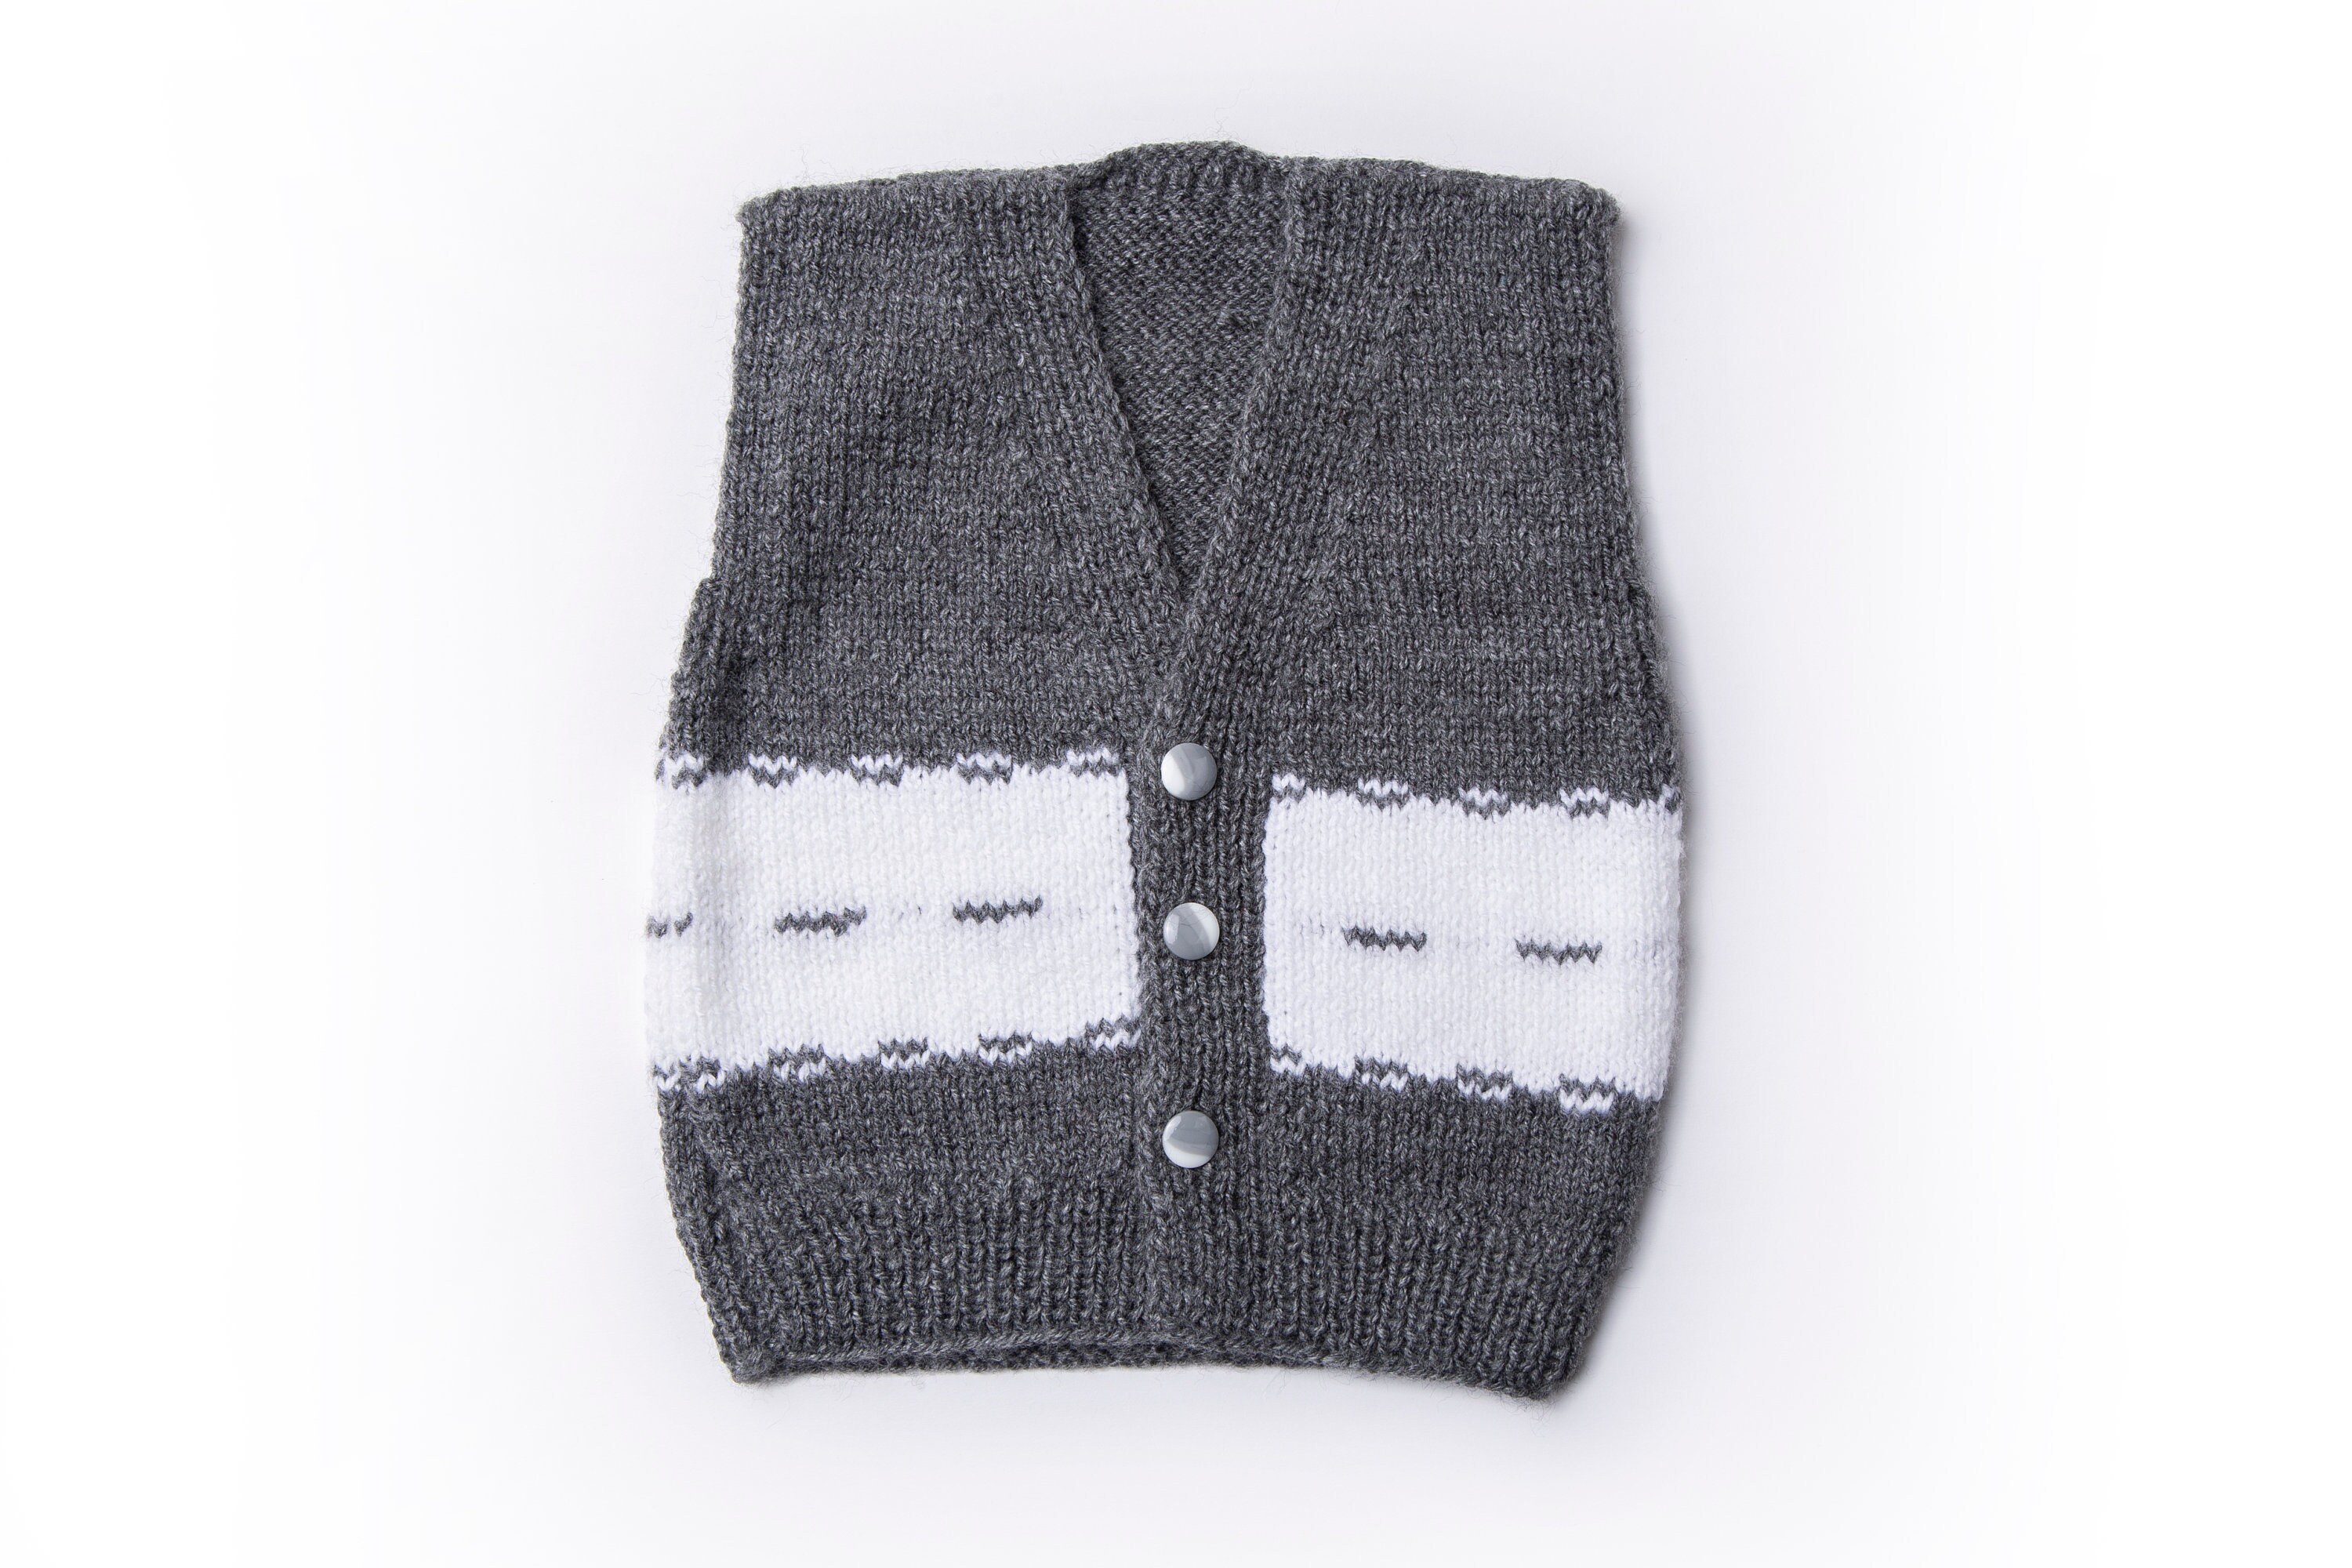 6-9 month size Ready to ship. Hand knitted cotton cardigan with lace details Clothing Unisex Kids Clothing Unisex Baby Clothing Jumpers 